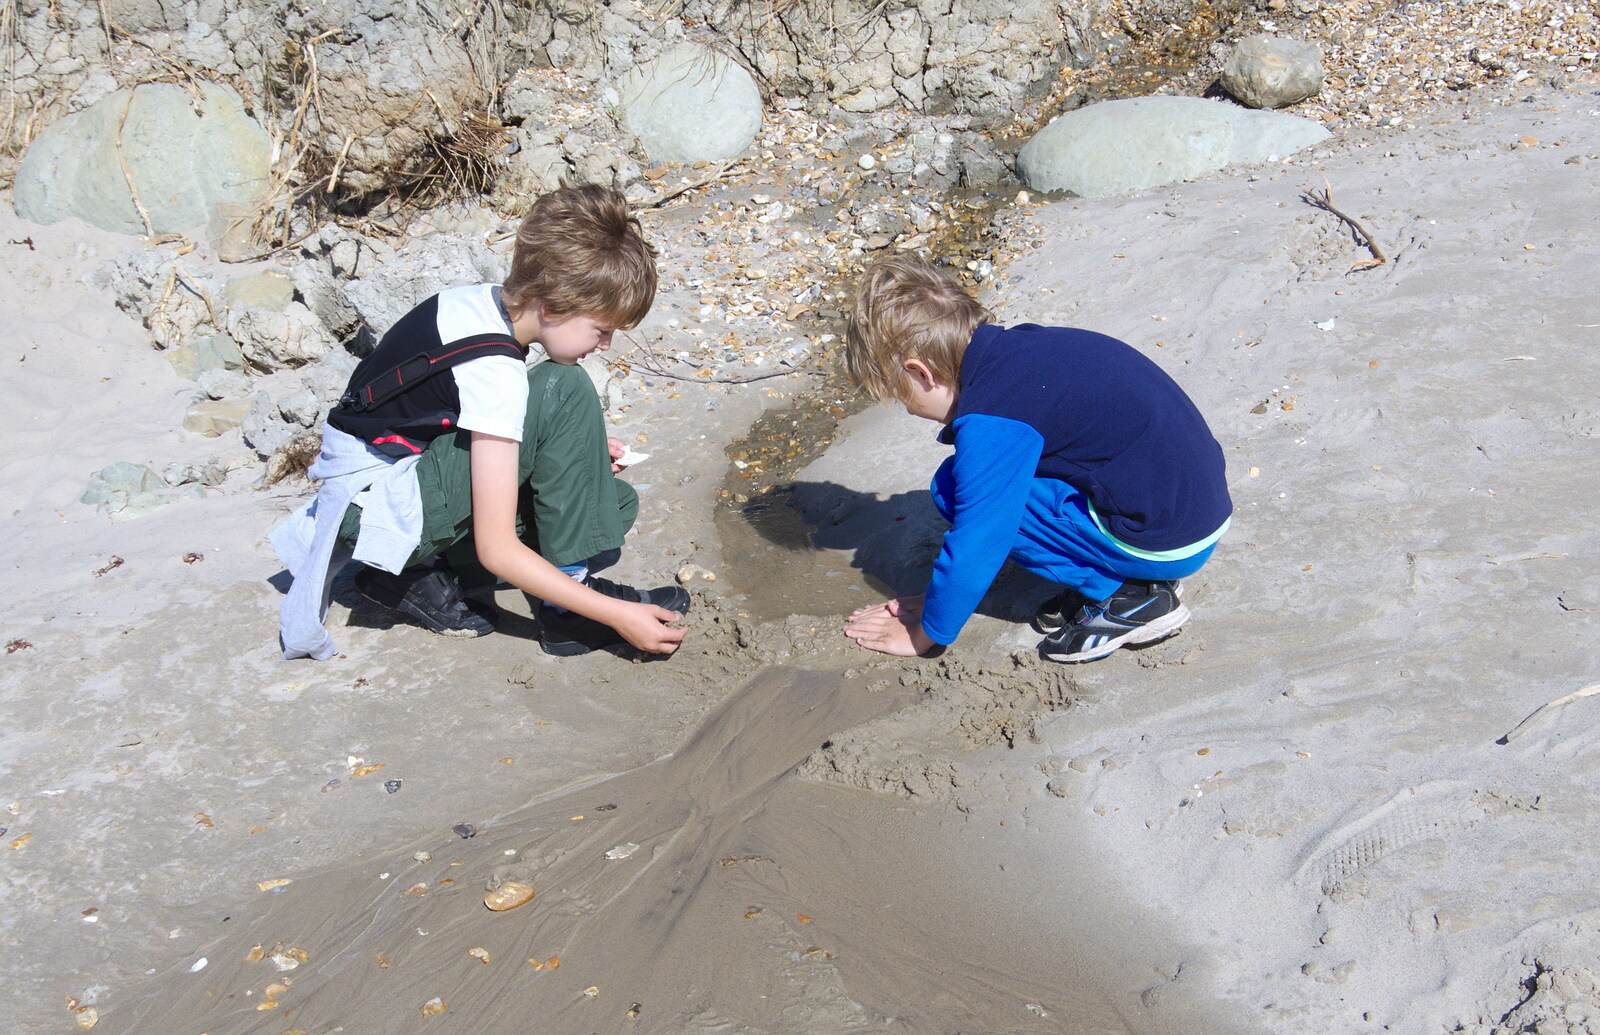 The boys build a dam out of sand from A Trip to the South Coast, Highcliffe, Dorset - 20th September 2019